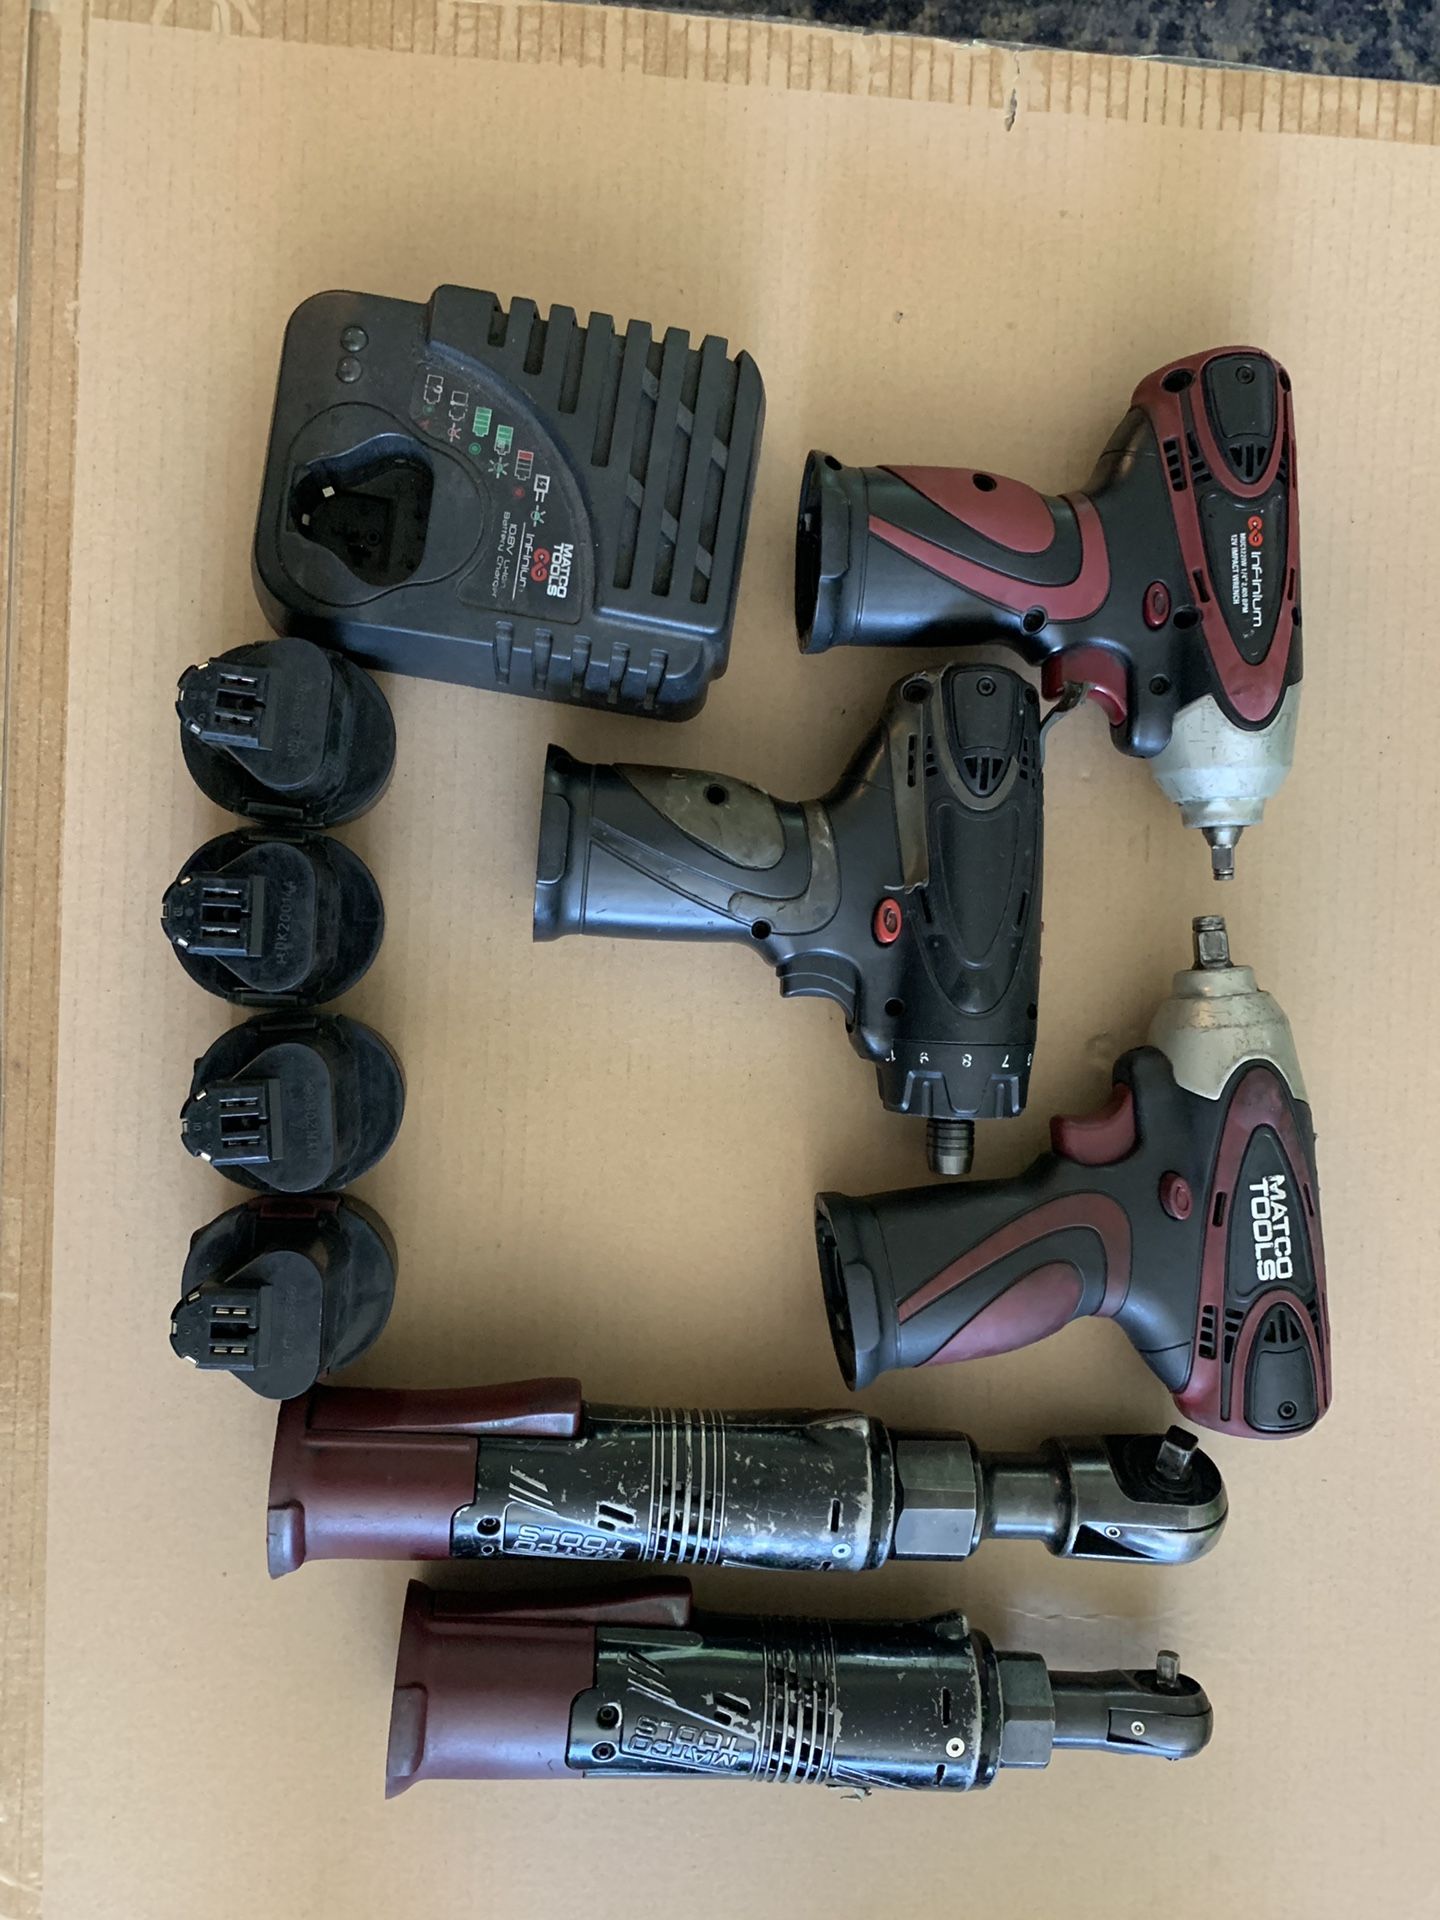 Matco infinium impact wratchets, impact gun, drill 4 batteries and charger